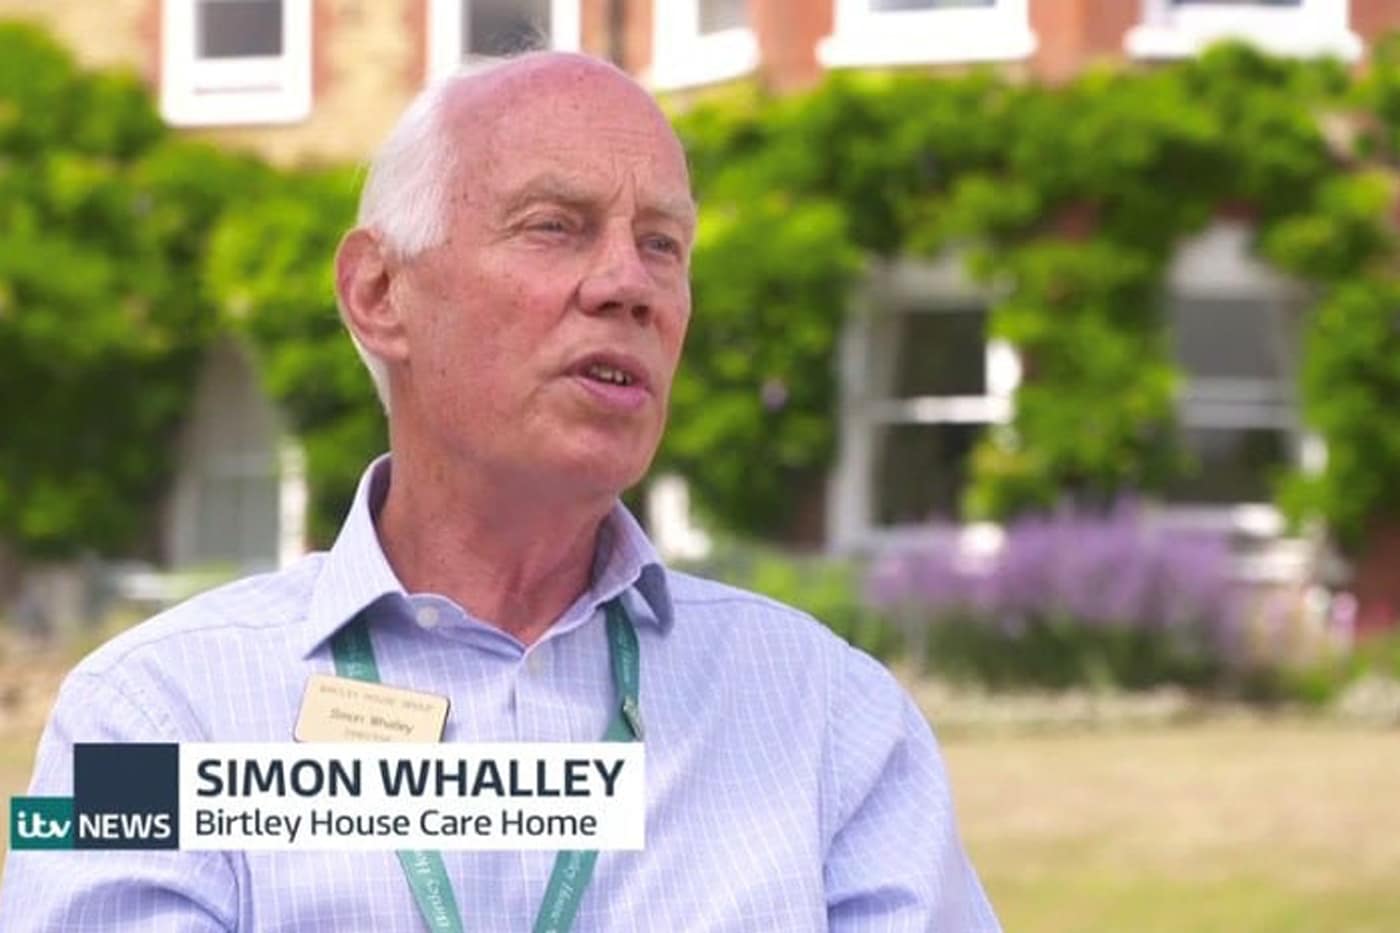 Simon Whalley being interviewed on ITV News